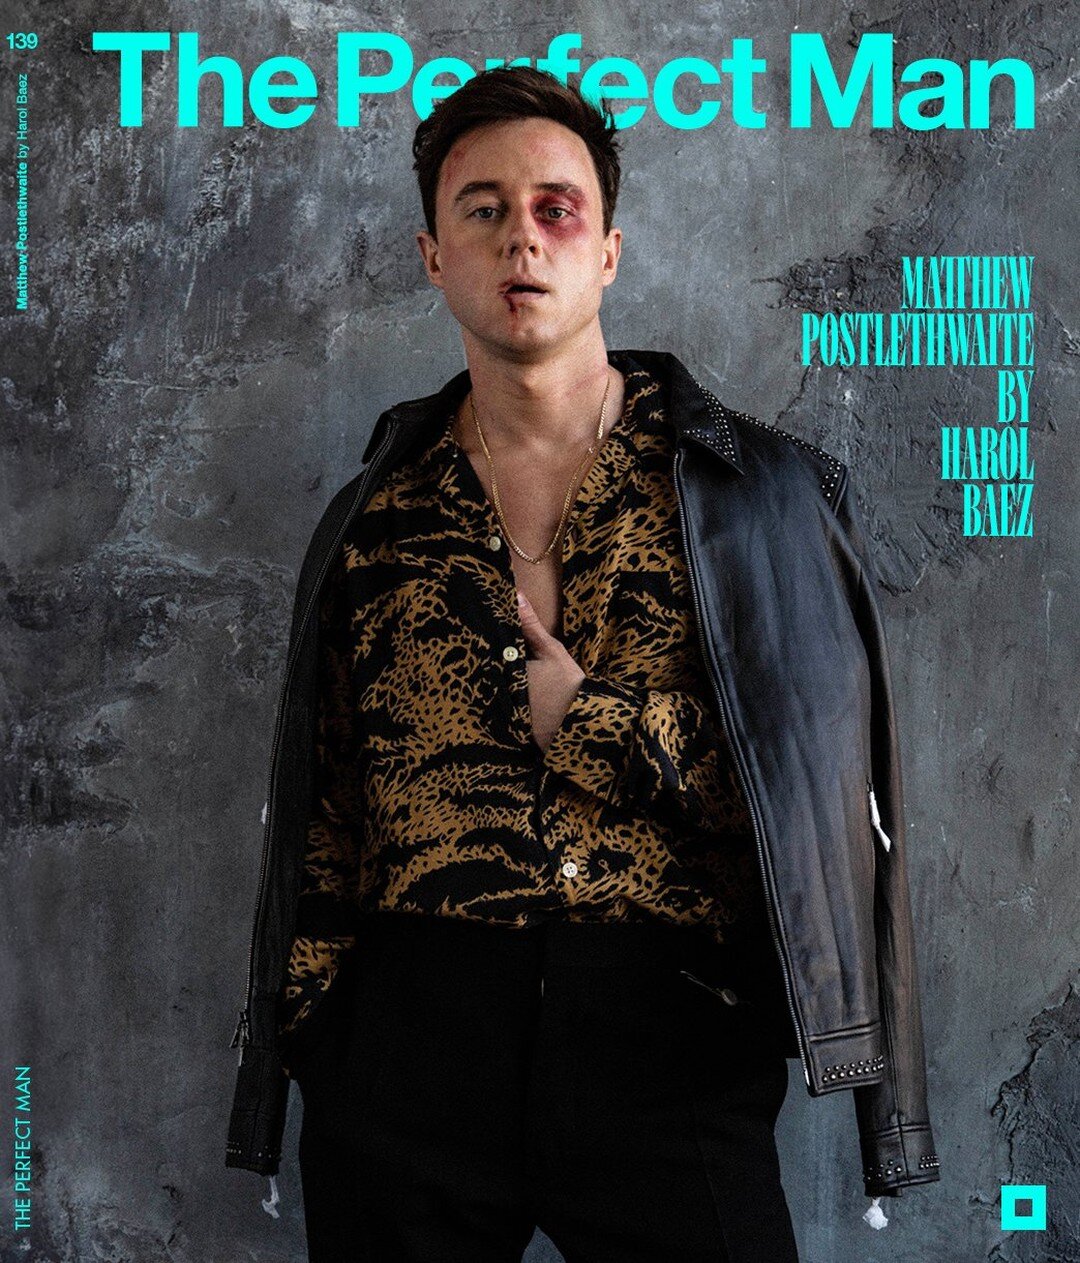 Fight Club: A Conversation with Matthew Postlethwaite, the quintessential talent which gained his acclaim for his roles in &lsquo;Peaky Blinders&rsquo;, &lsquo;The Letter Men&rsquo; and &lsquo;The Great Artist.&rsquo; In this interview, he opens up a